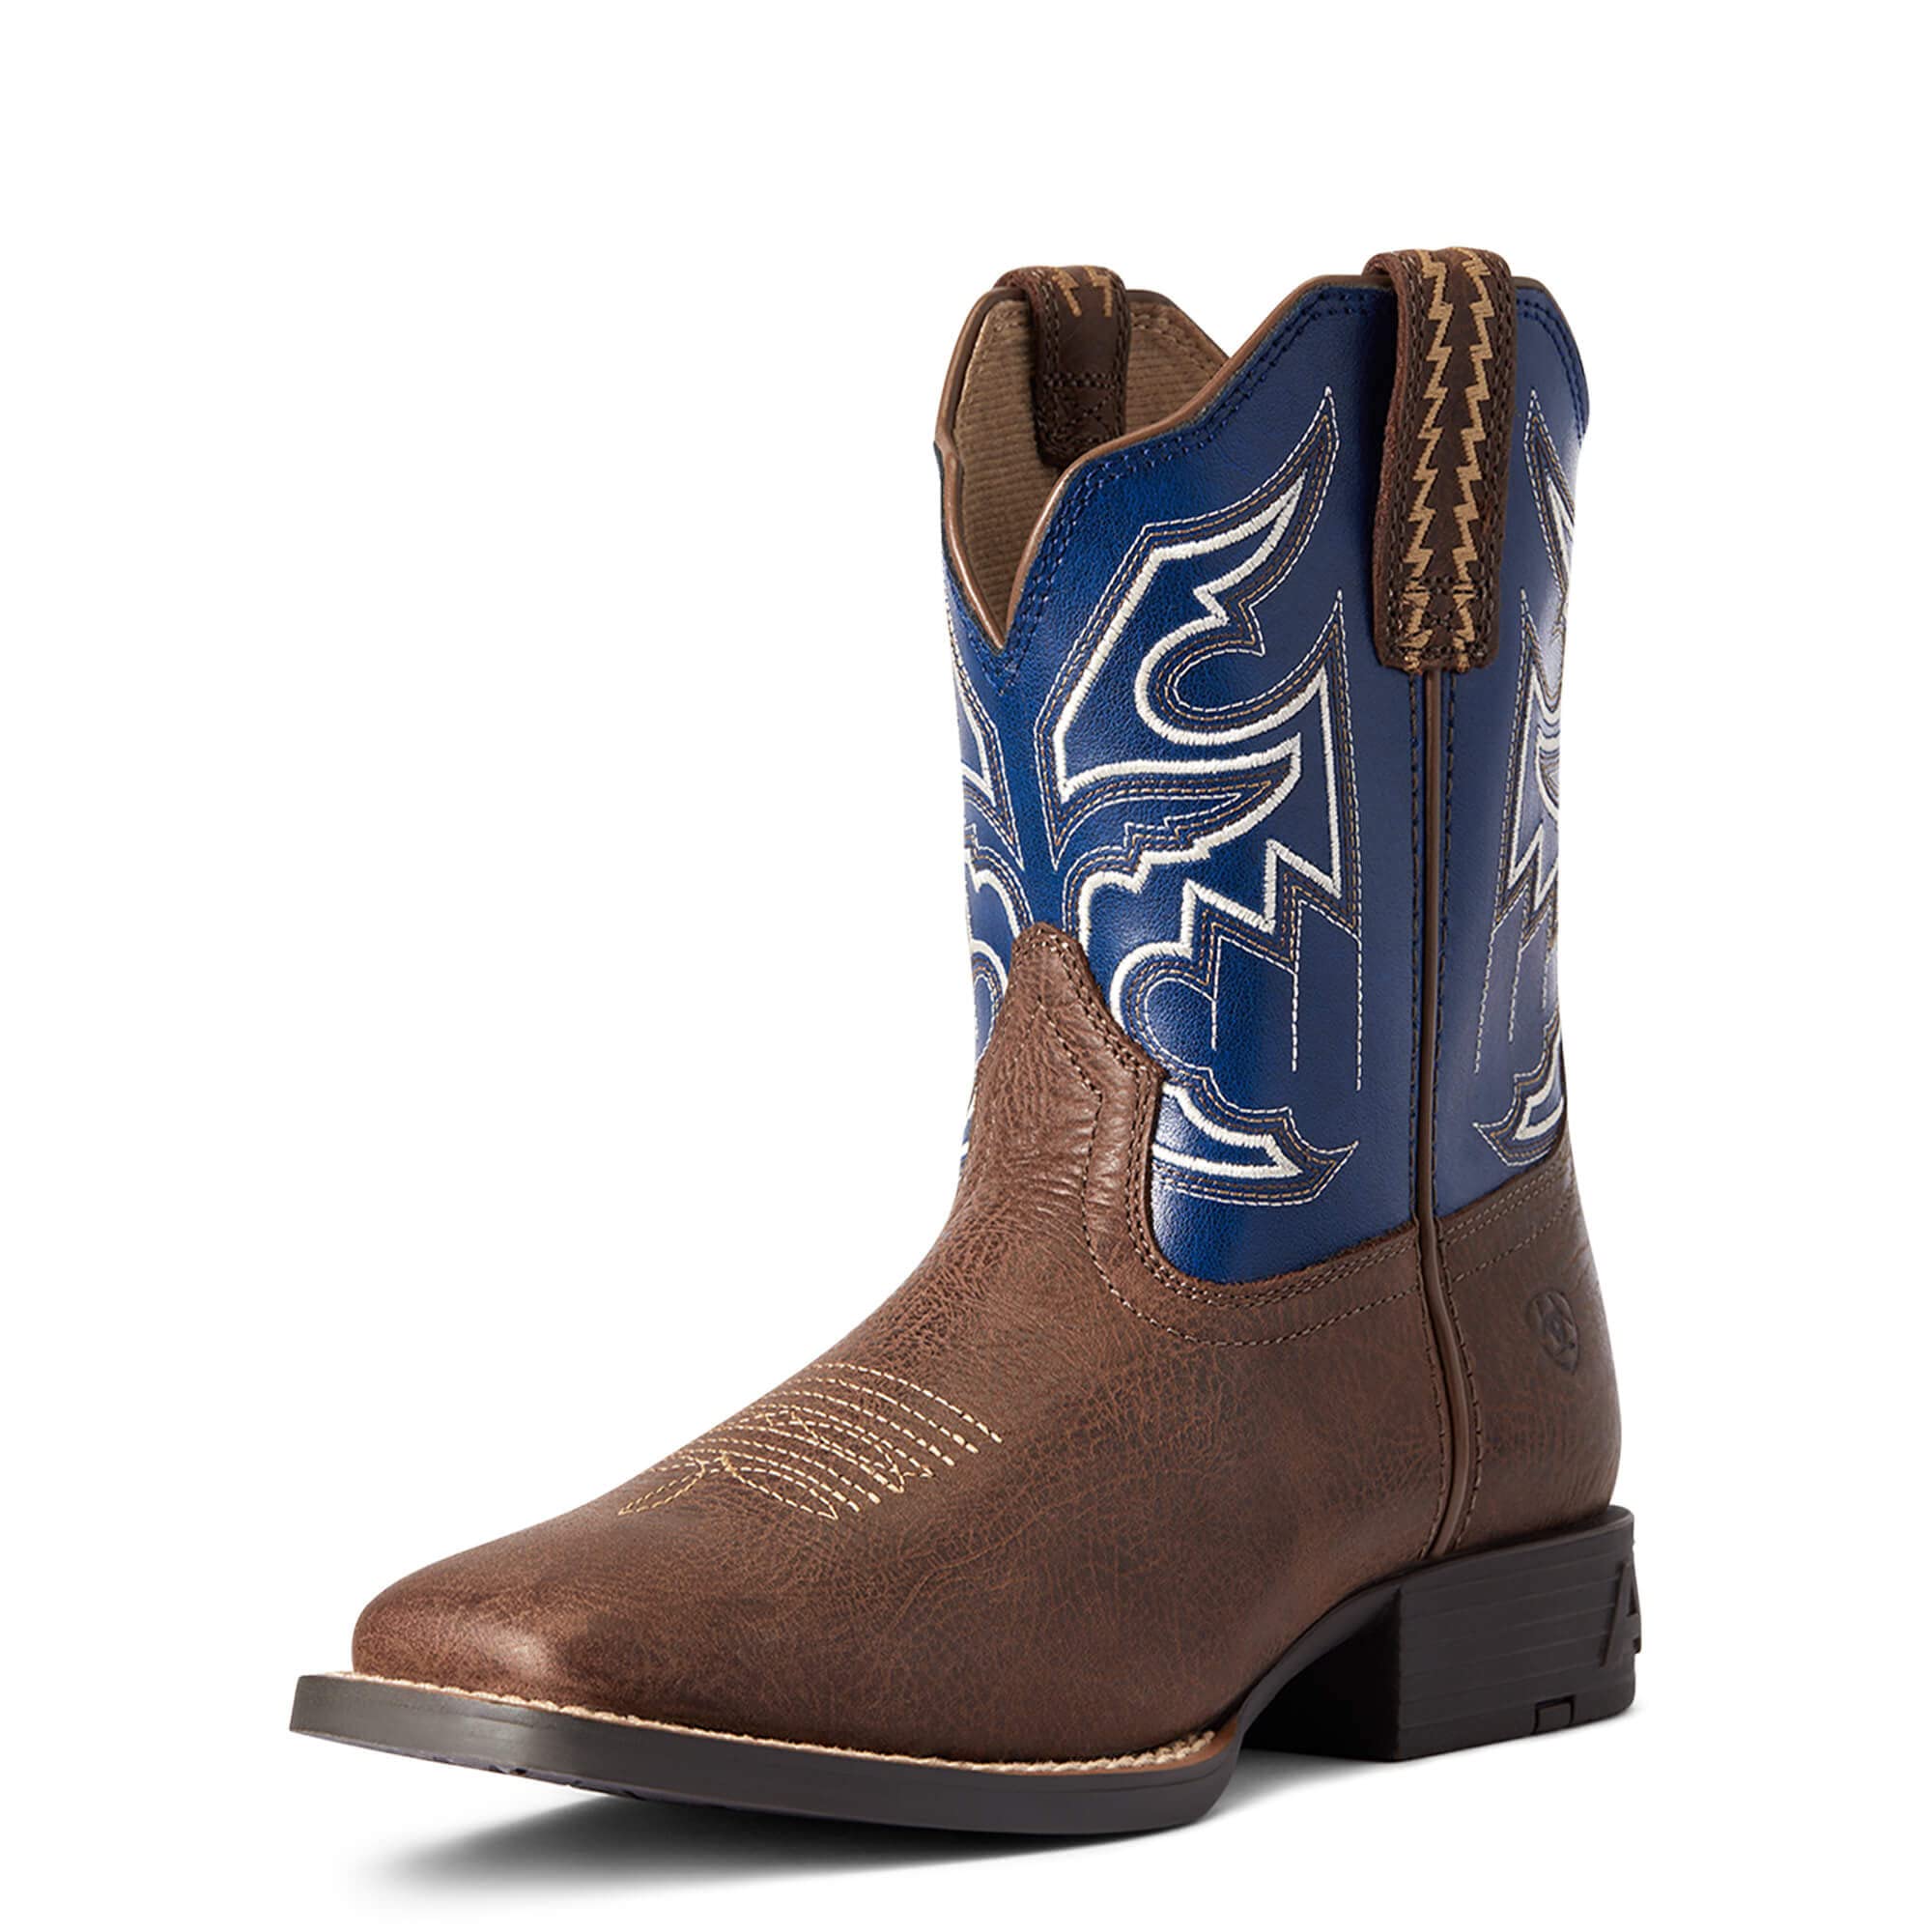 ARIAT Unisex-Child Youth Sorting Pen Western Boot